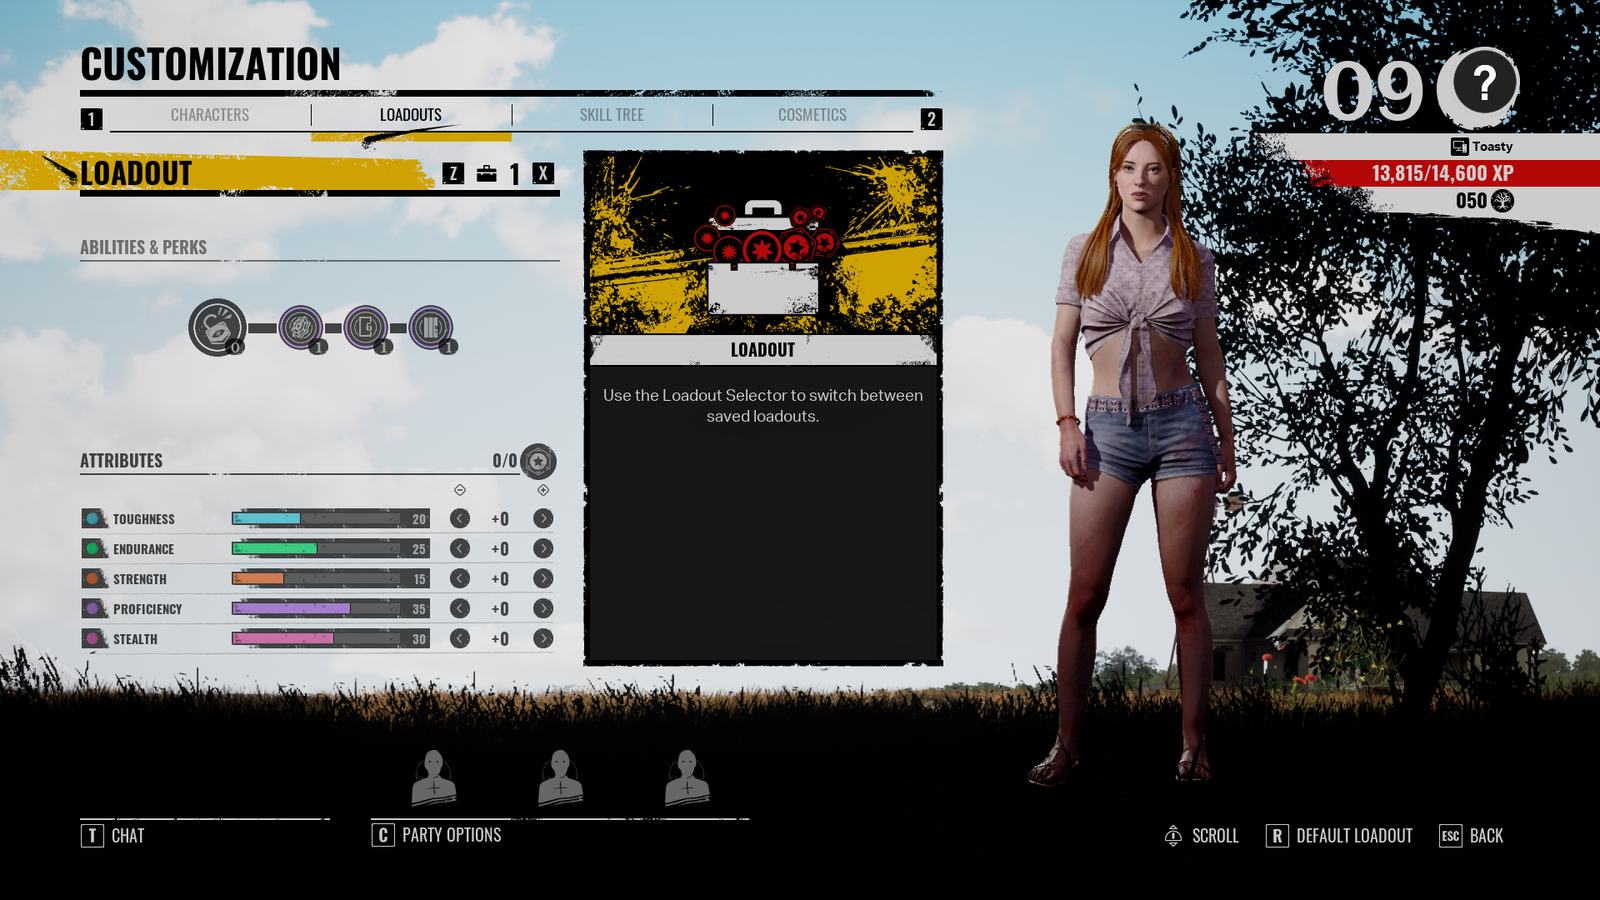 Connie's customisation screen in texas chain saw massacre